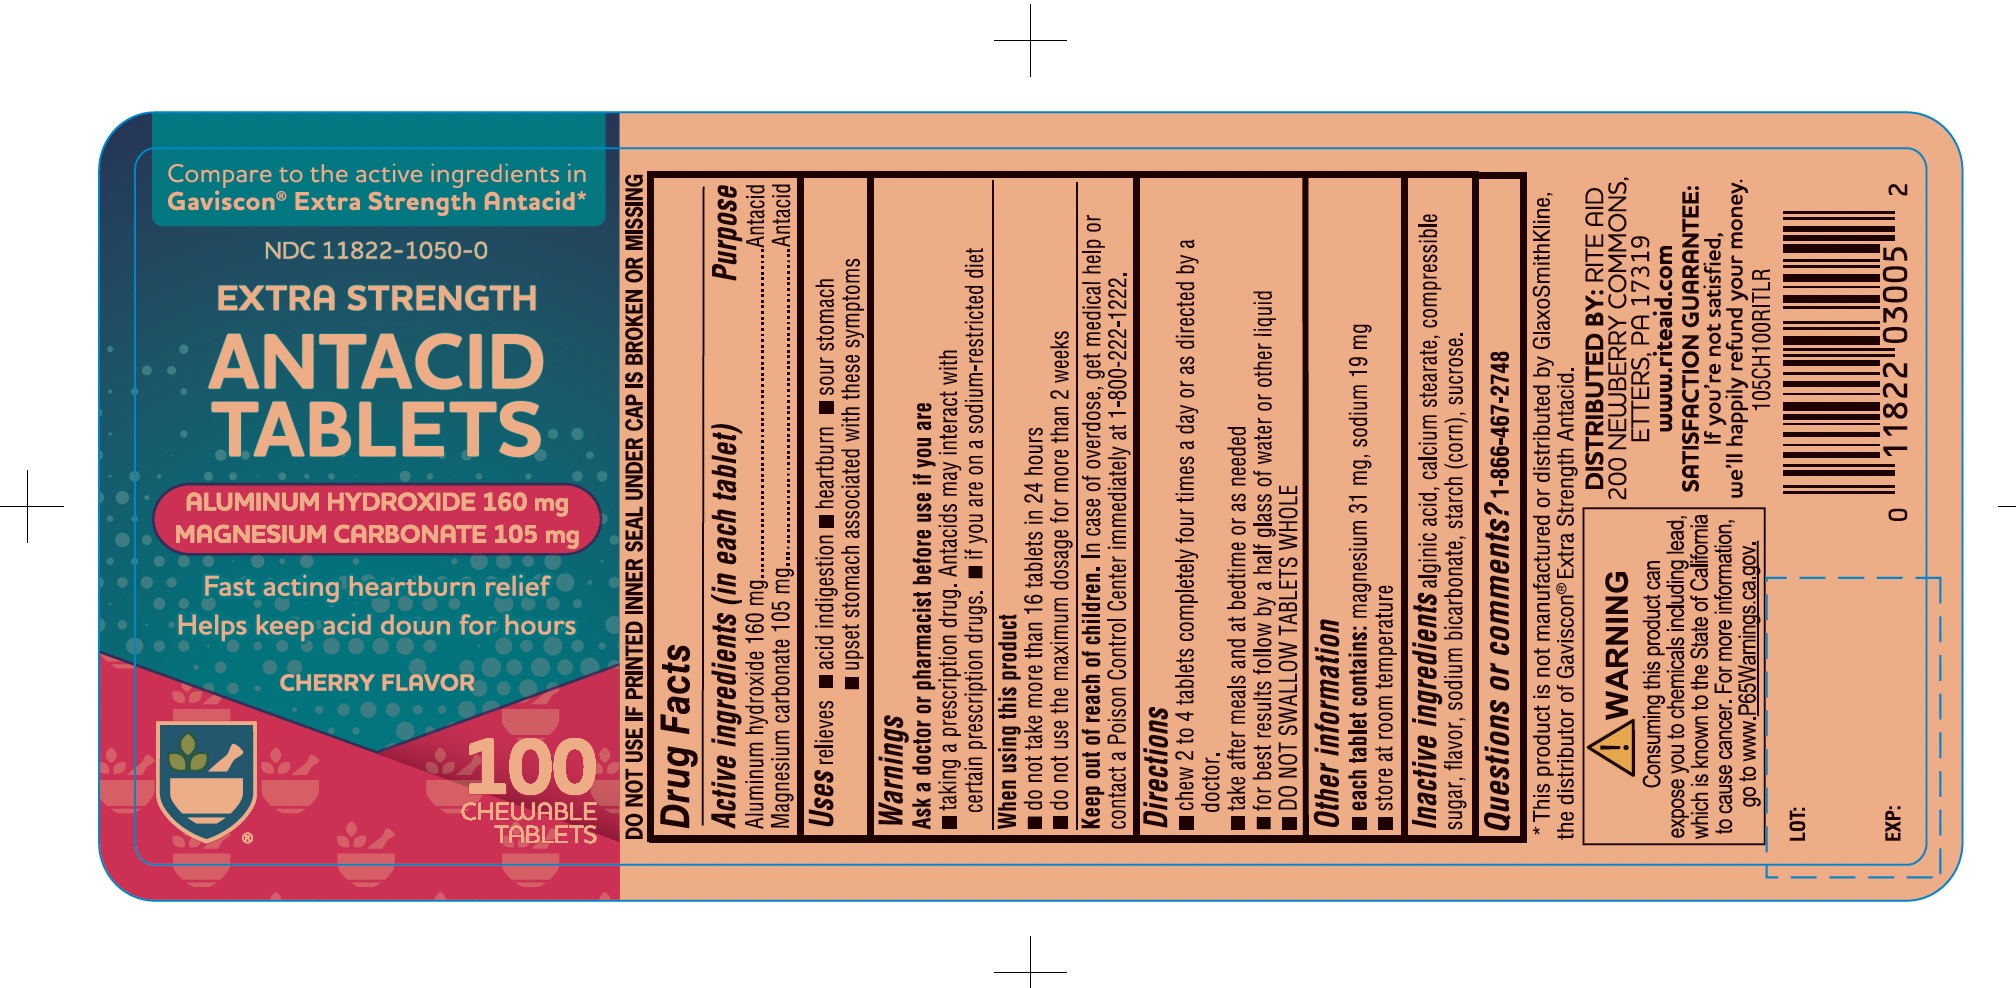 RITE AID EXTRA STRENGTH 100 CHEWABLE TABLETS